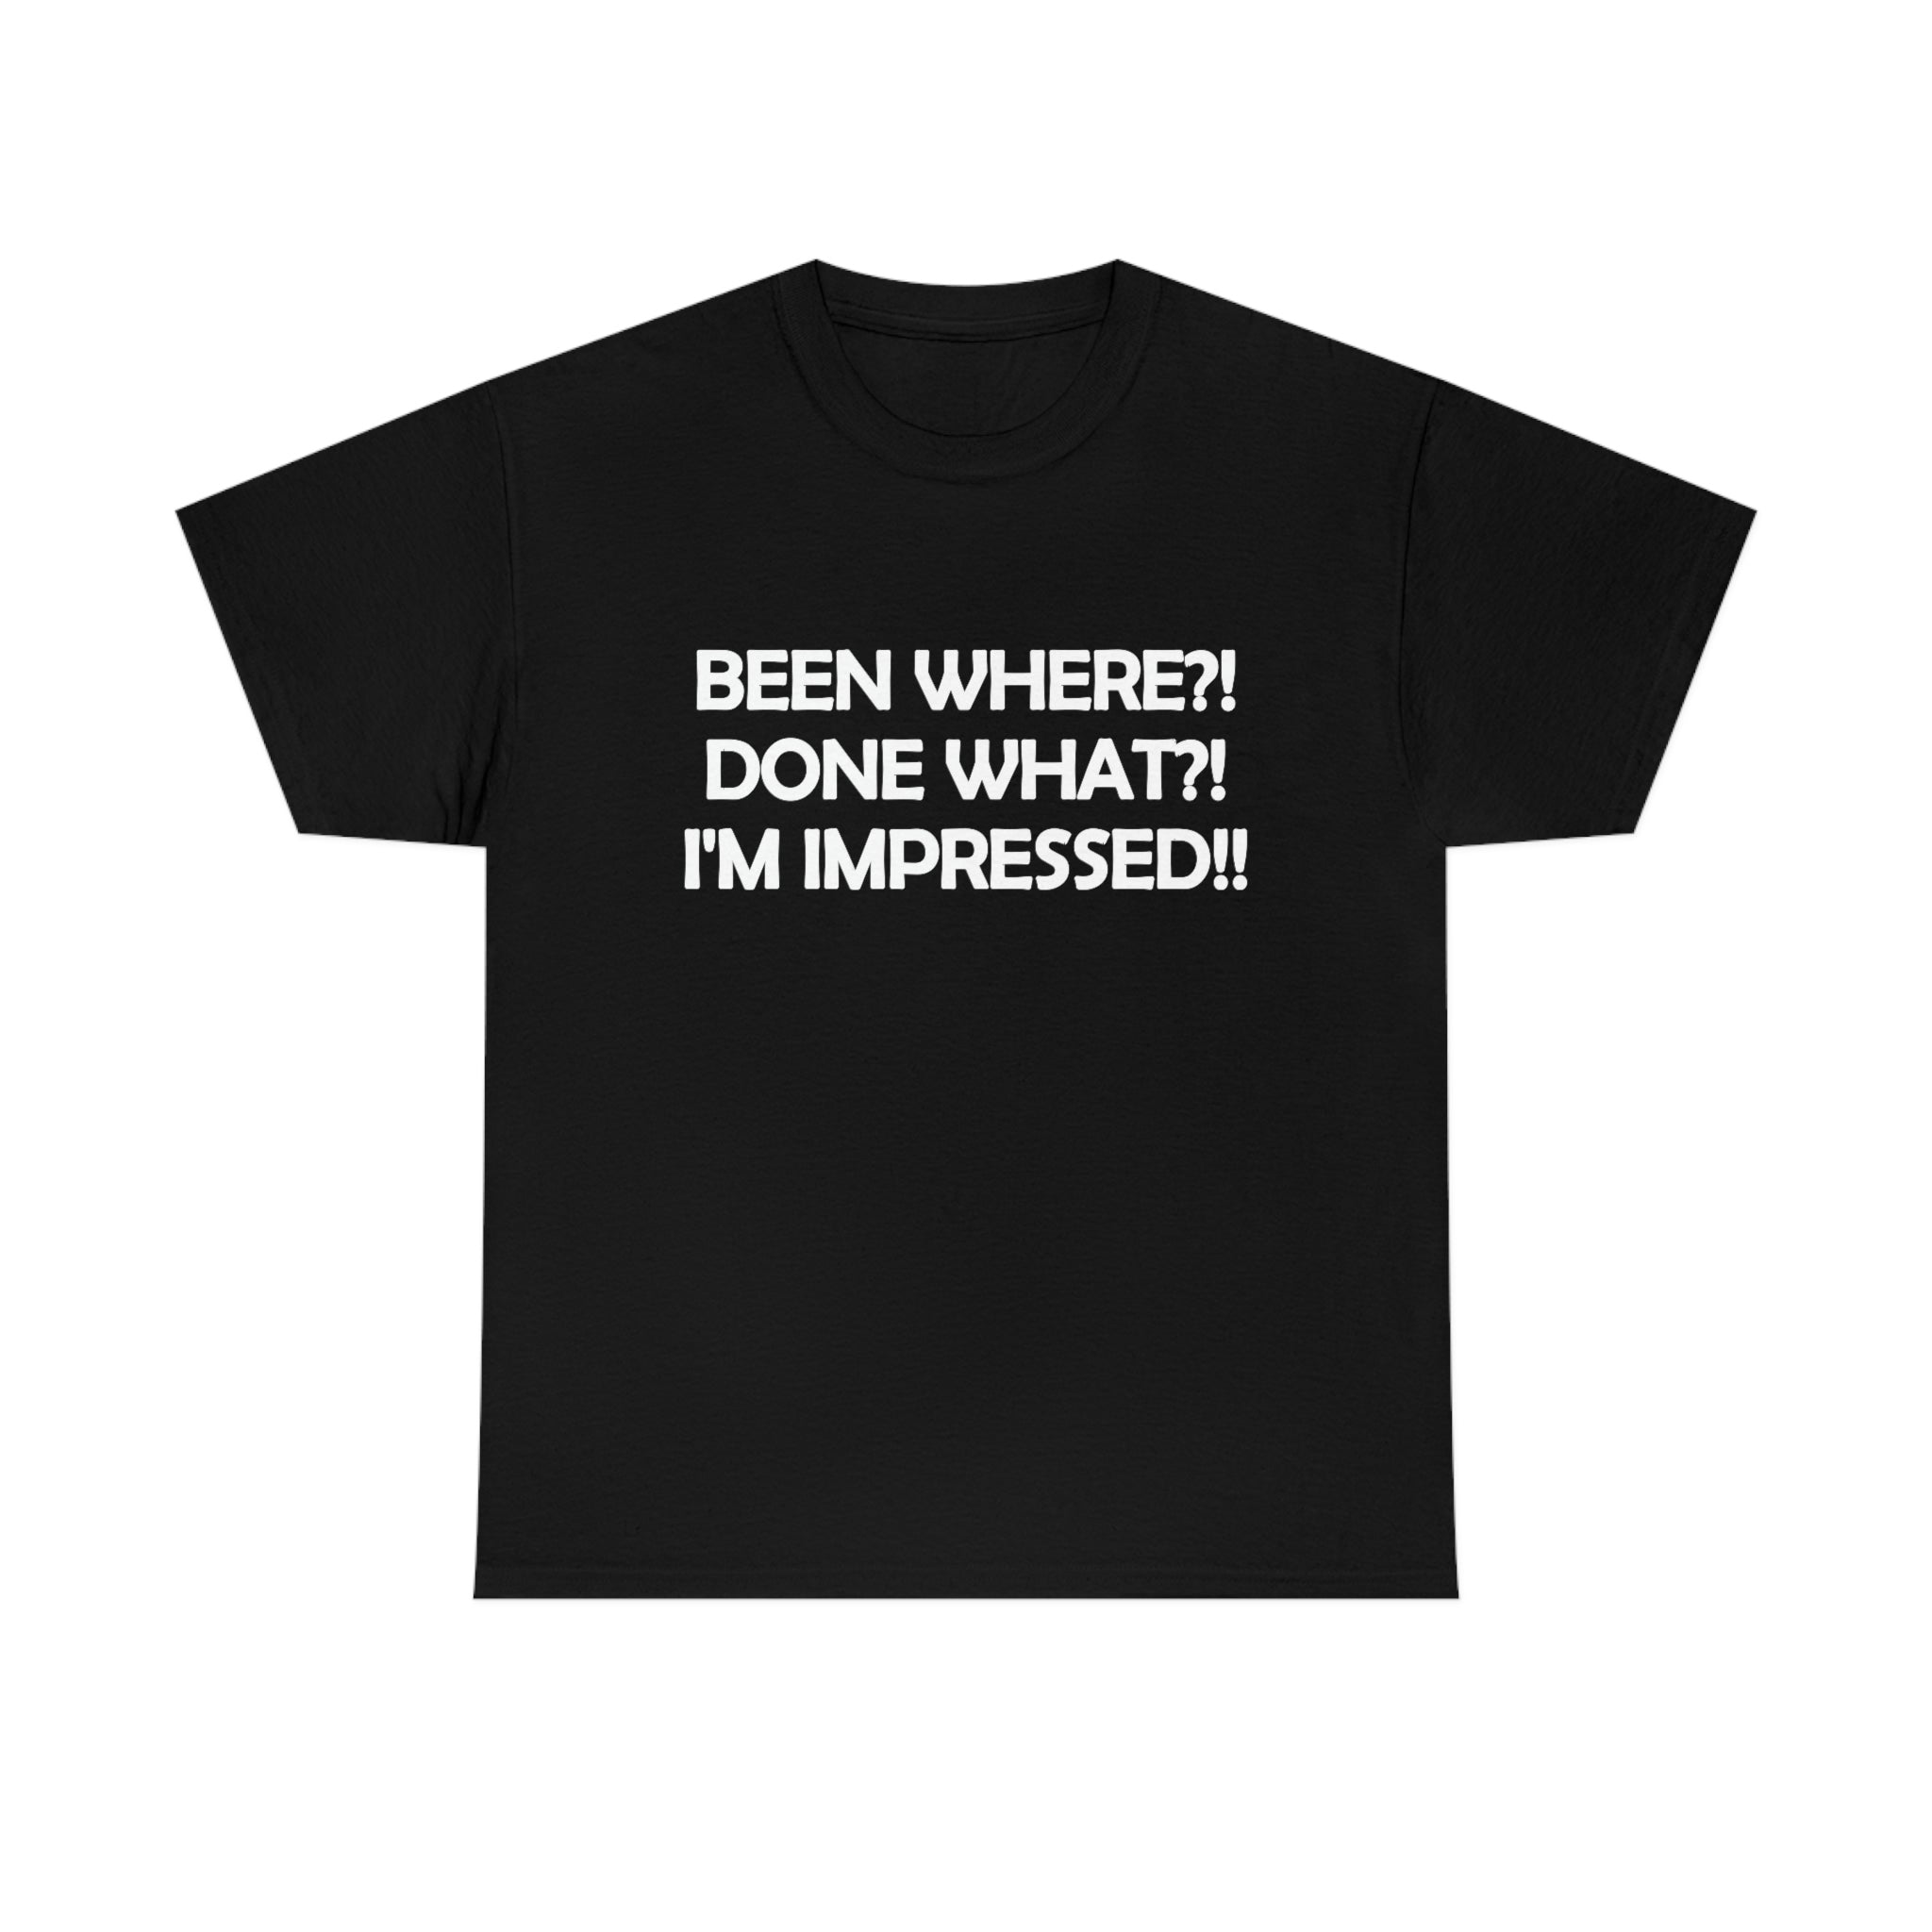 unisex heavy cotton t-shirt with the caption 'been where?! done what?! I'm impressed' in white lettering